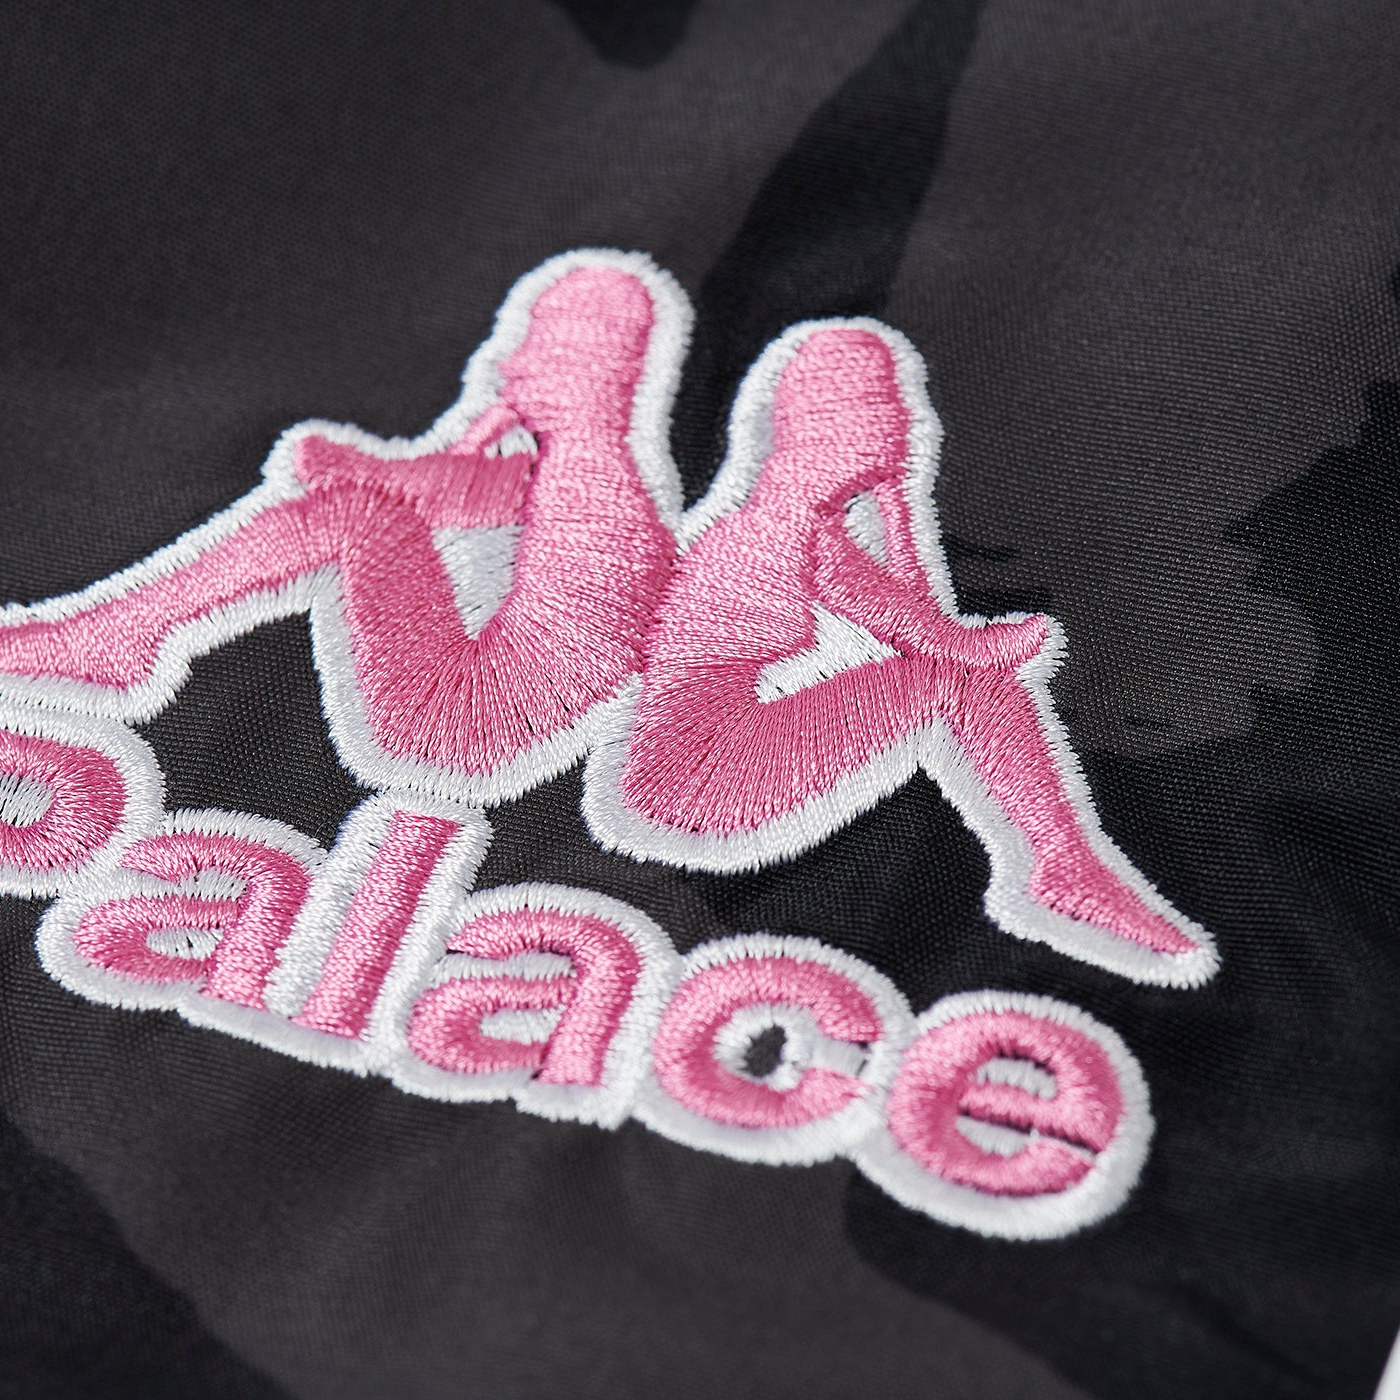 Thumbnail PALACE KAPPA FOR ALPINE TRACKSUIT PANT NIGHT DESERT CAMO one color